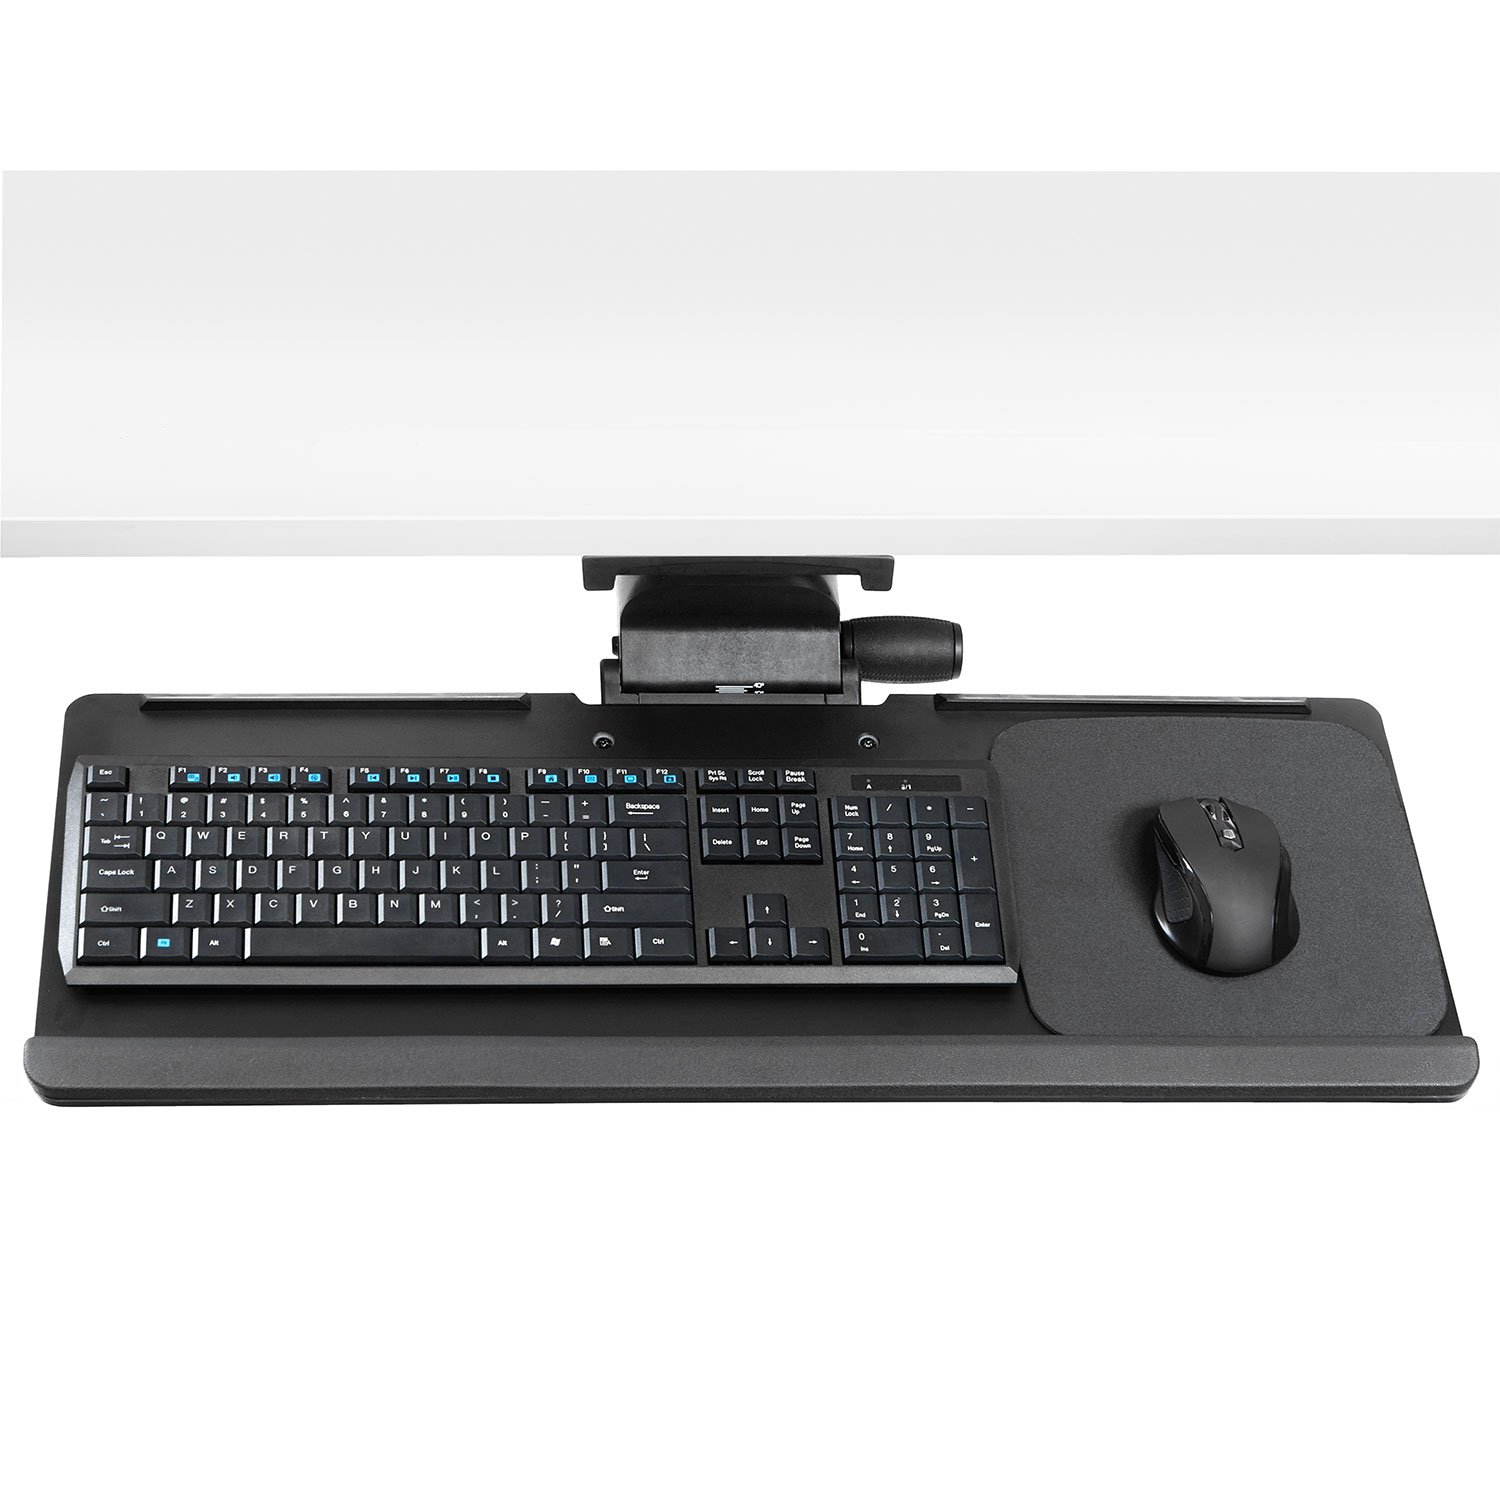 Innovative KT-27 Extended Reach Keyboard Arm with 27" Keyboard Tray